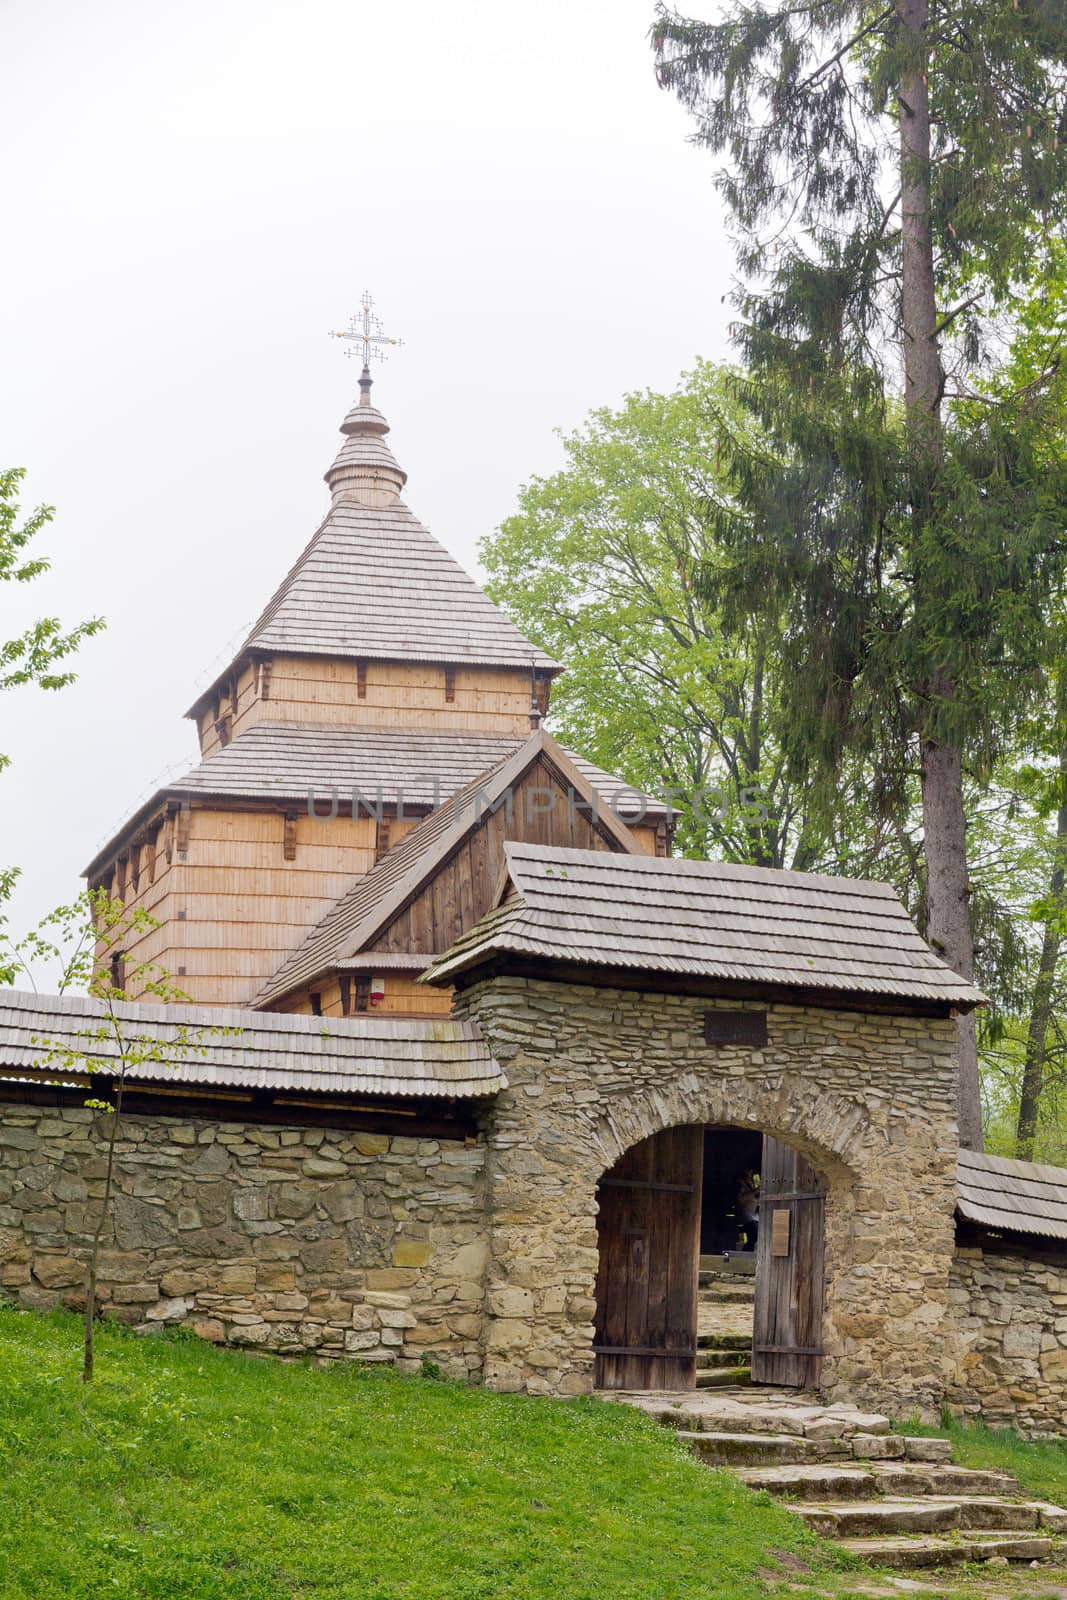 the oldest eastern orthodox church architecture in poland in radruz from 16th century by mychadre77